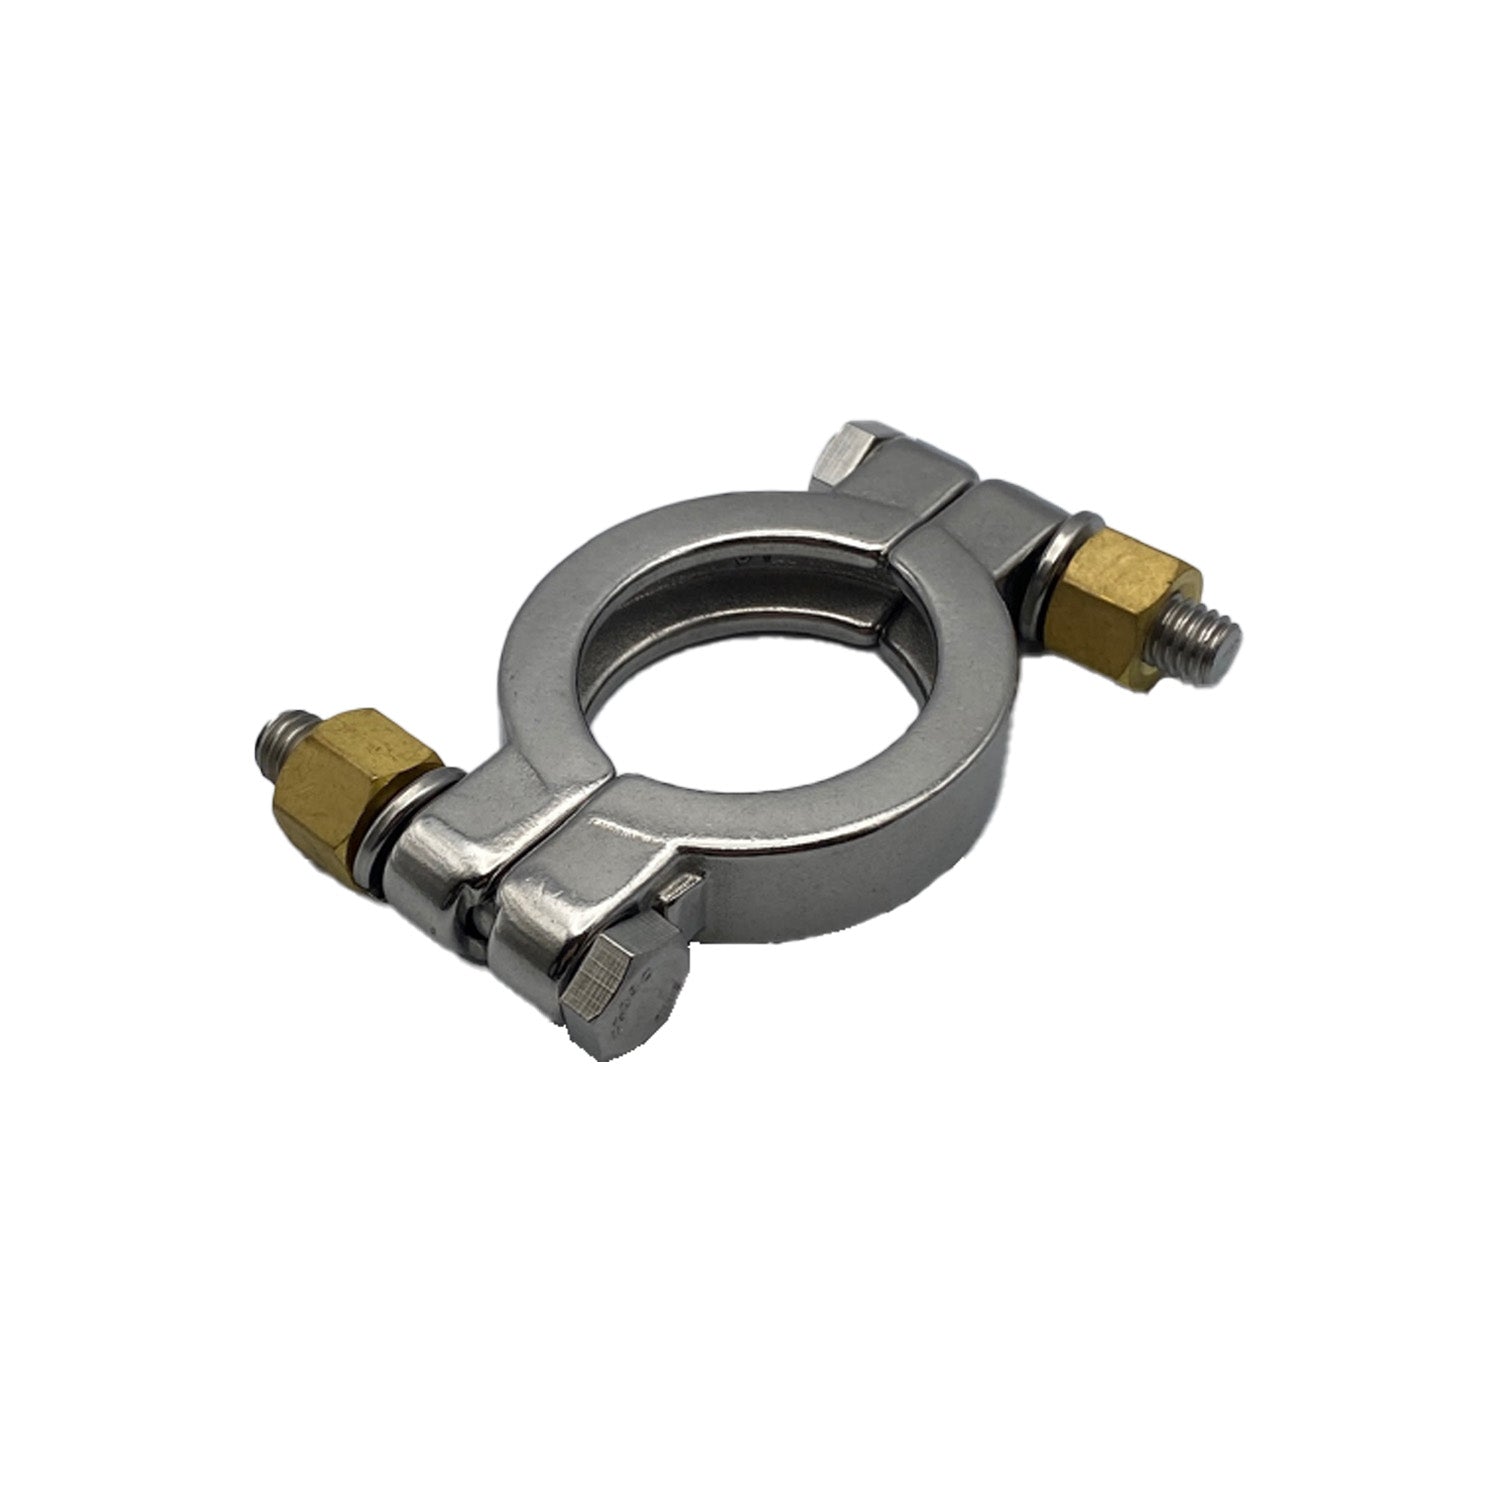  Sight Level Valves  Tri Clamp 1.5 inch Upper & Lower